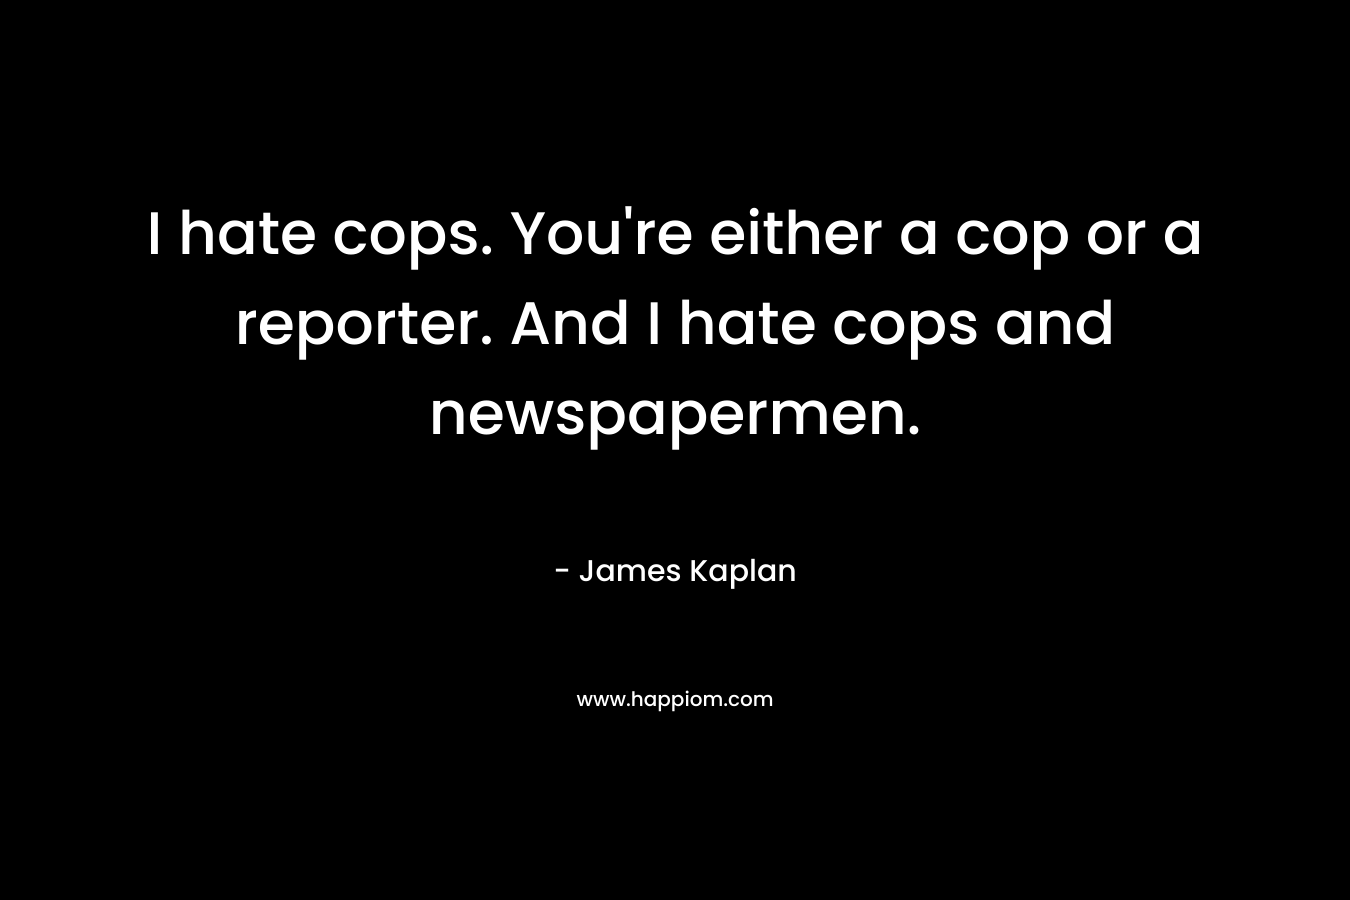 I hate cops. You’re either a cop or a reporter. And I hate cops and newspapermen. – James Kaplan